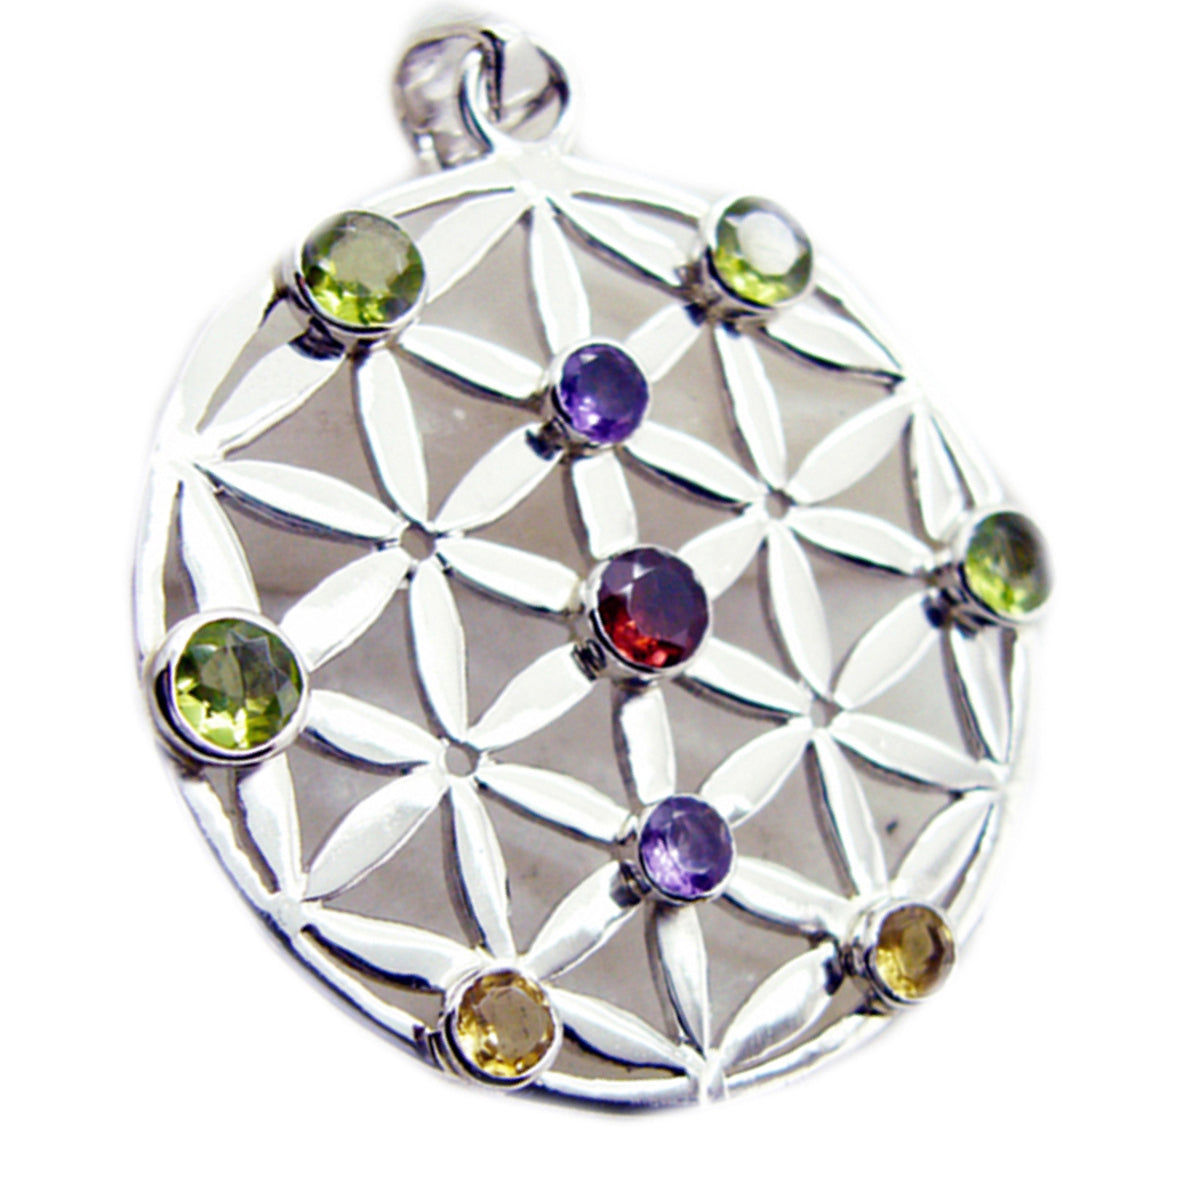 Riyo Smashing Gems Round Faceted Multi Color Multi Stone Solid Silver Pendant Gift For Anniversary